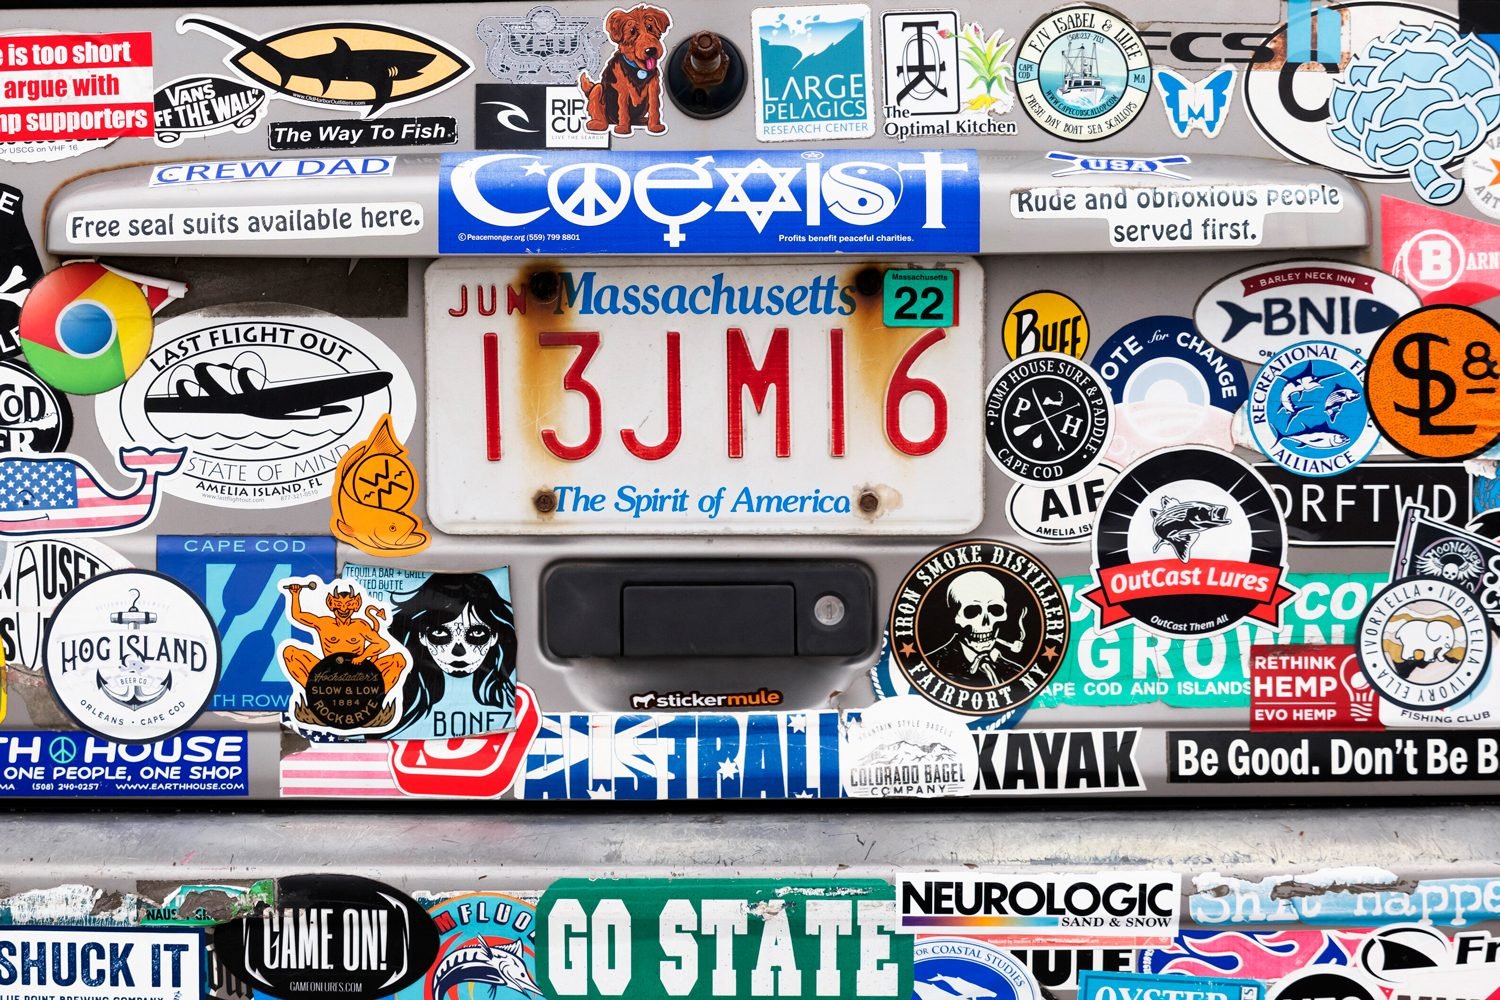 Massachusetts Car With Bumper Stickers On Display Covering the Back of the Unknown Car